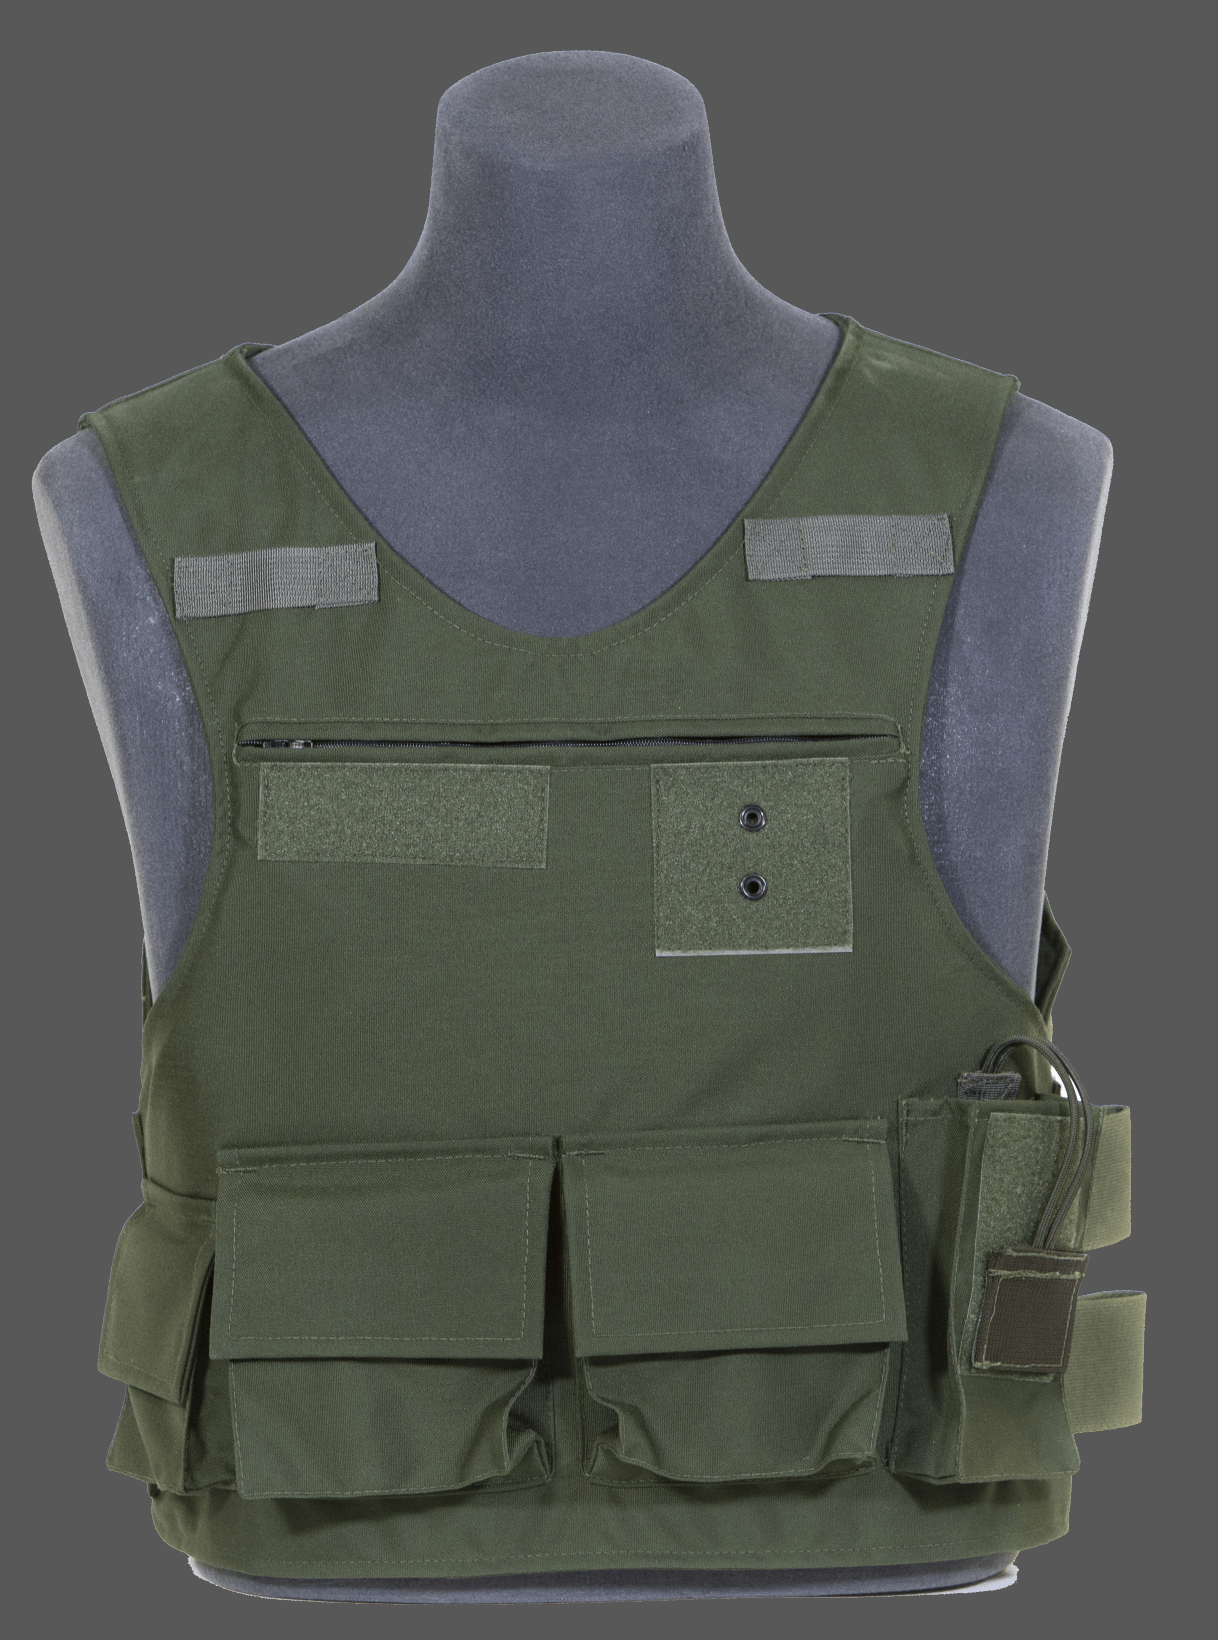 New Large Second Chance Concealable Carrier Body Armor Bullet Proof Vest  IIIA